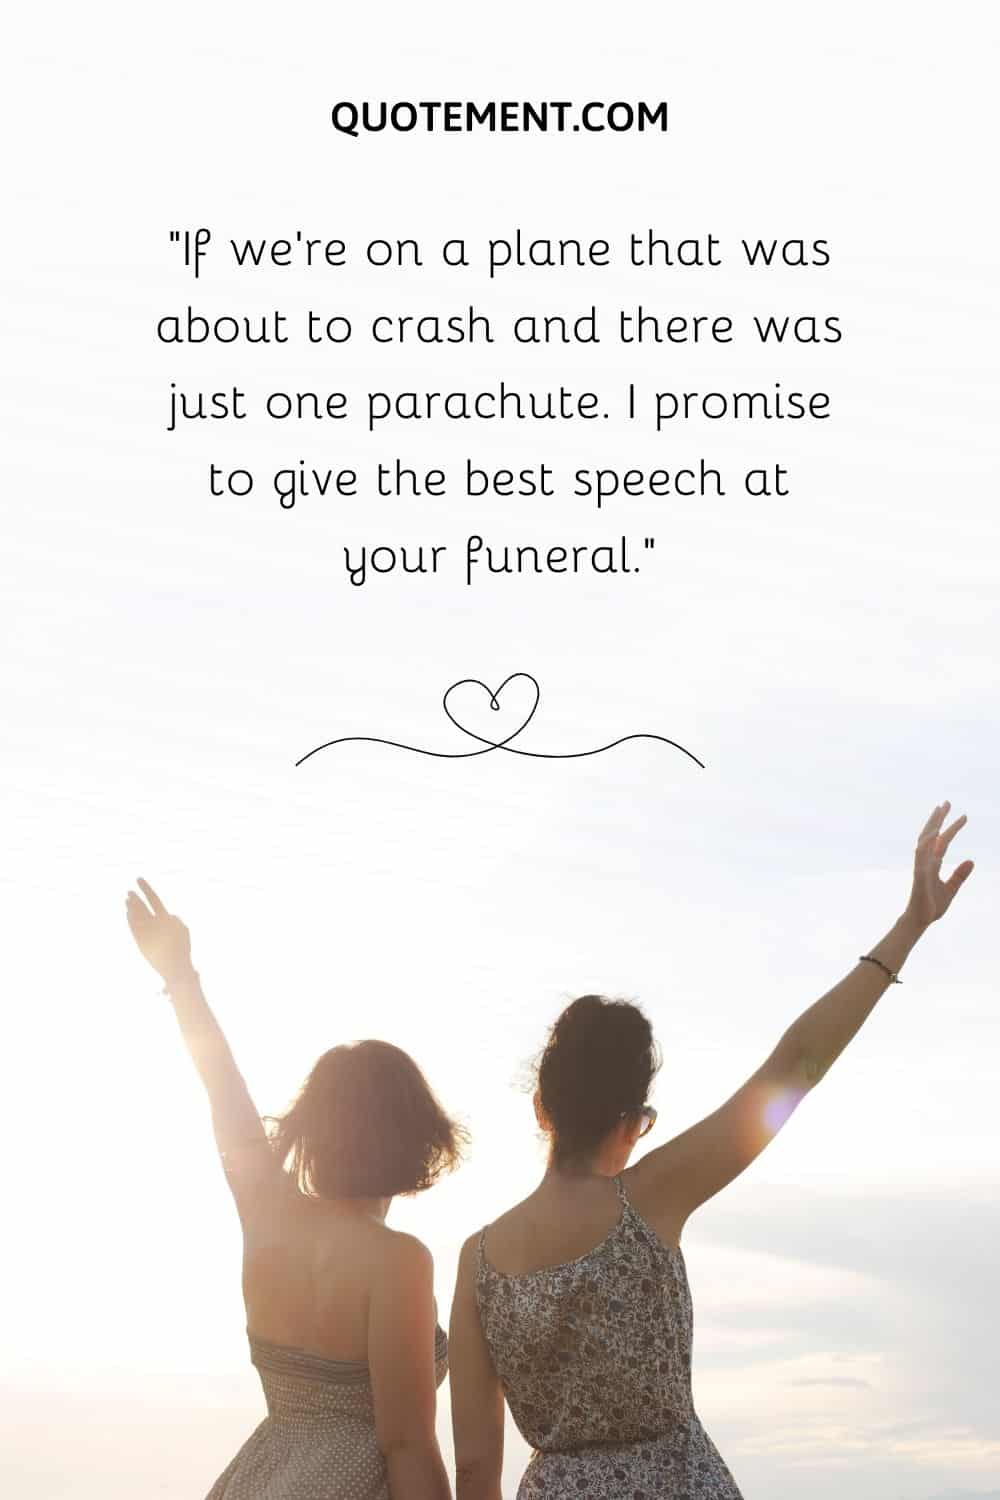 promise to give the best speech at your funeral.